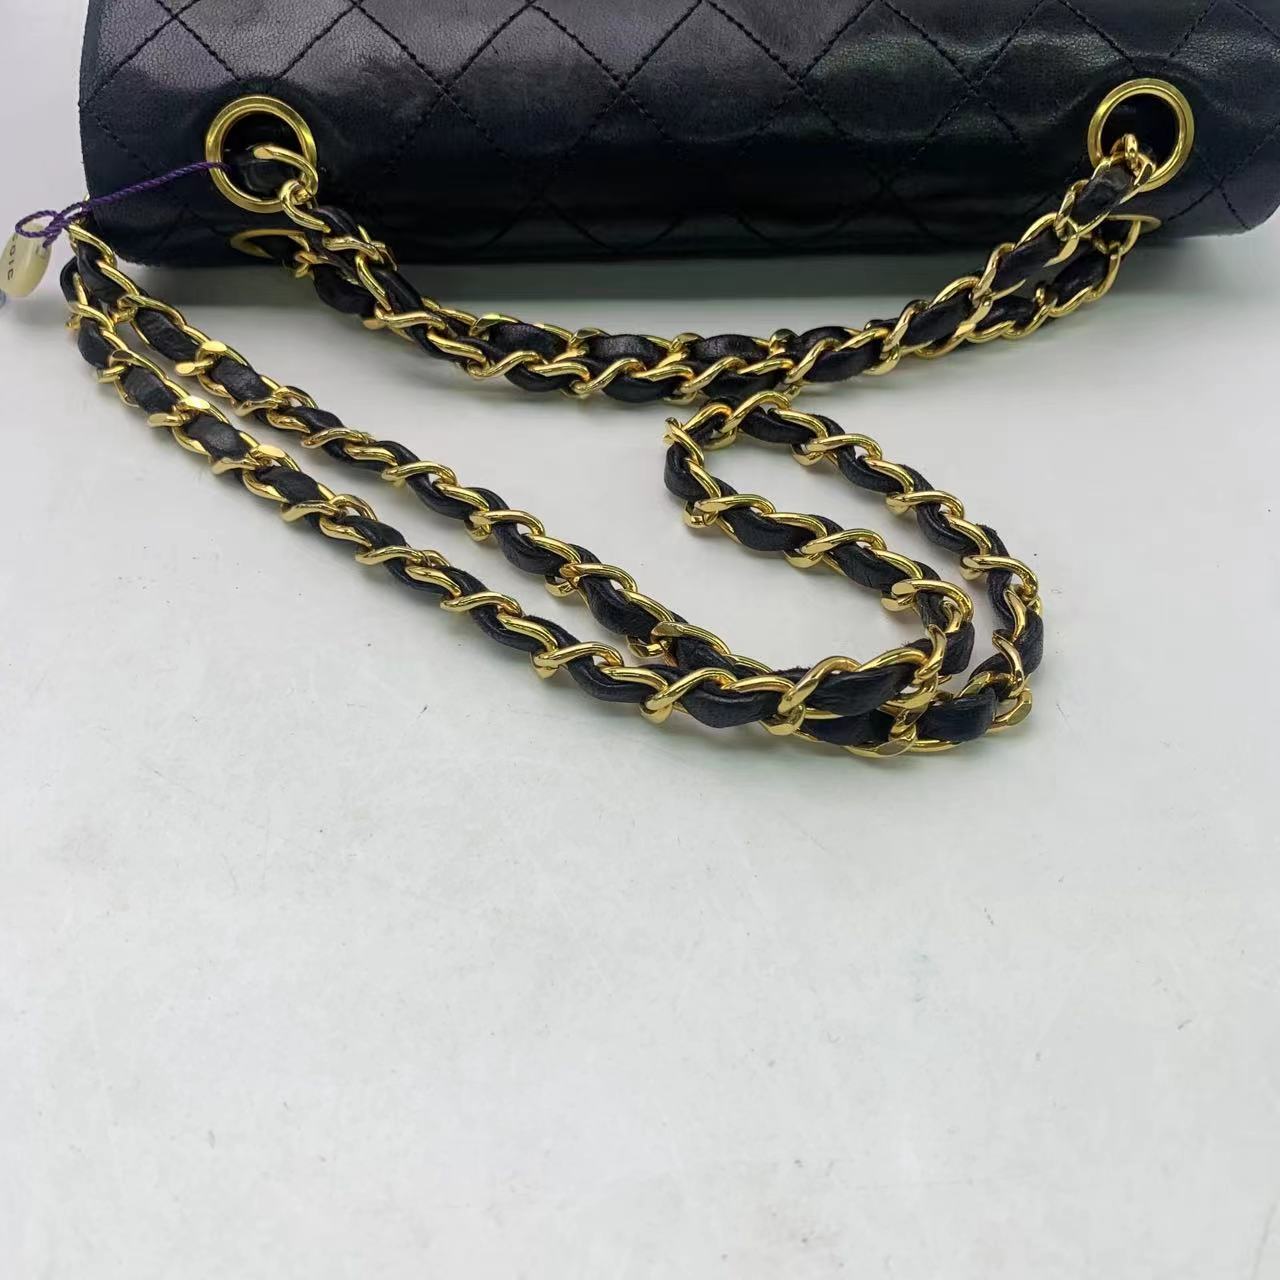 Chanel Classic Flap Small Black Lambskin Leather with 24k Gold Hardware